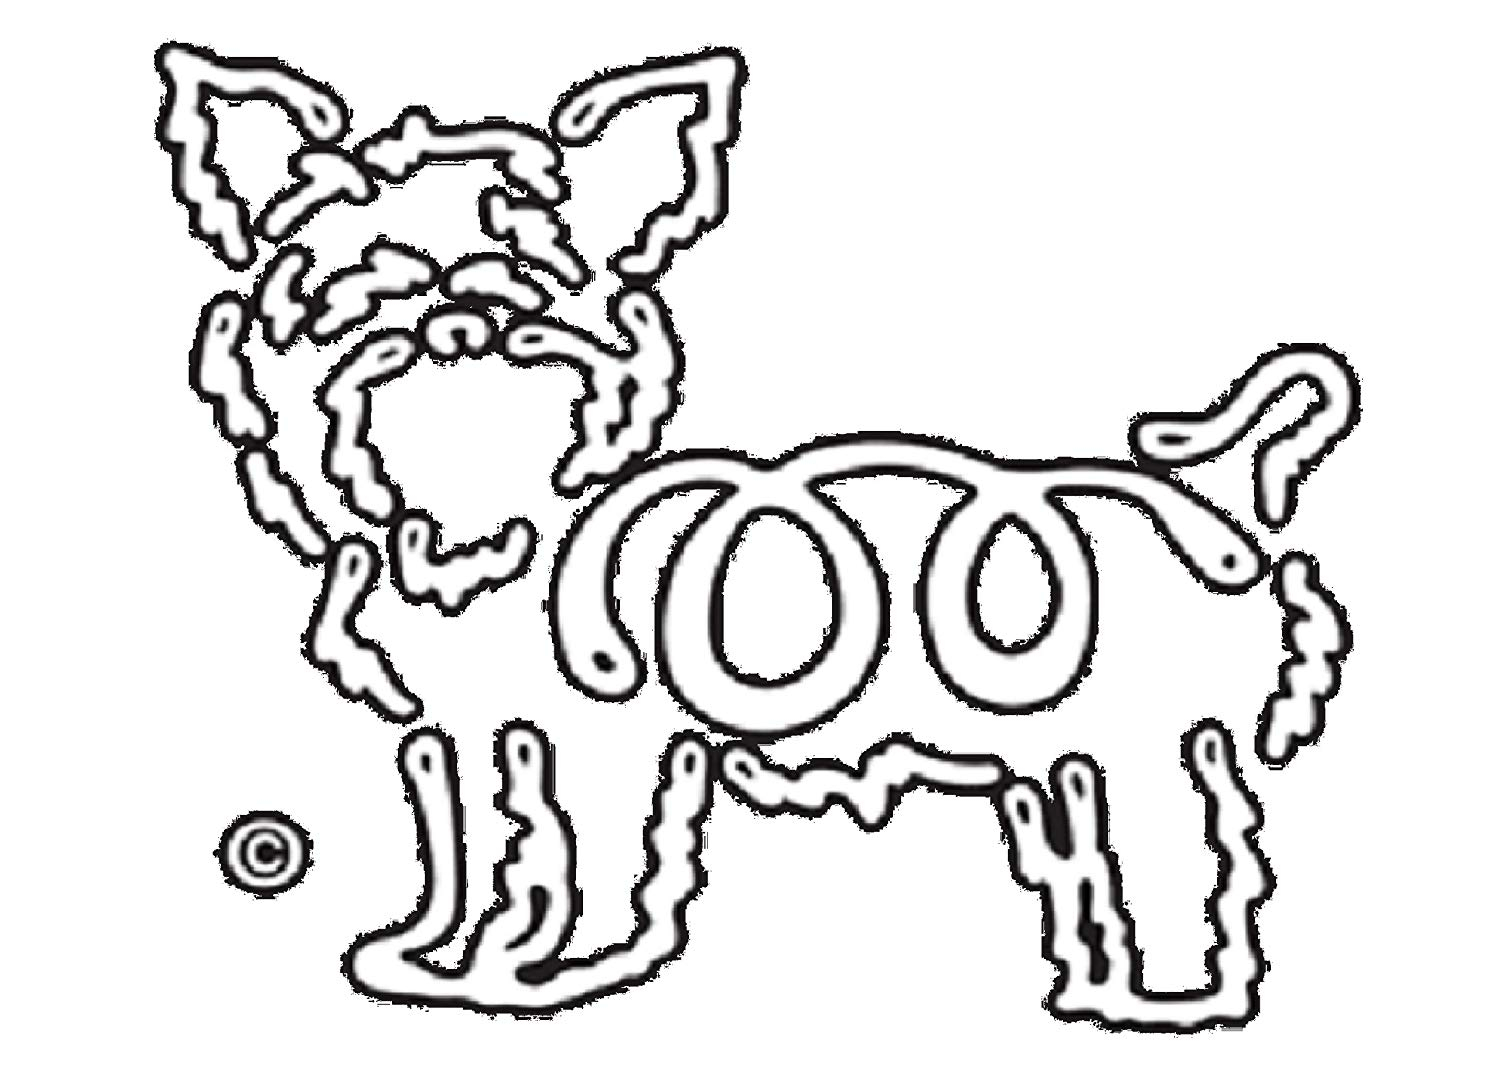 Teacup Coloring Pages To Print Coloring Book Yorkie Coloring Pages Yorkie Dog Coloring Pages In